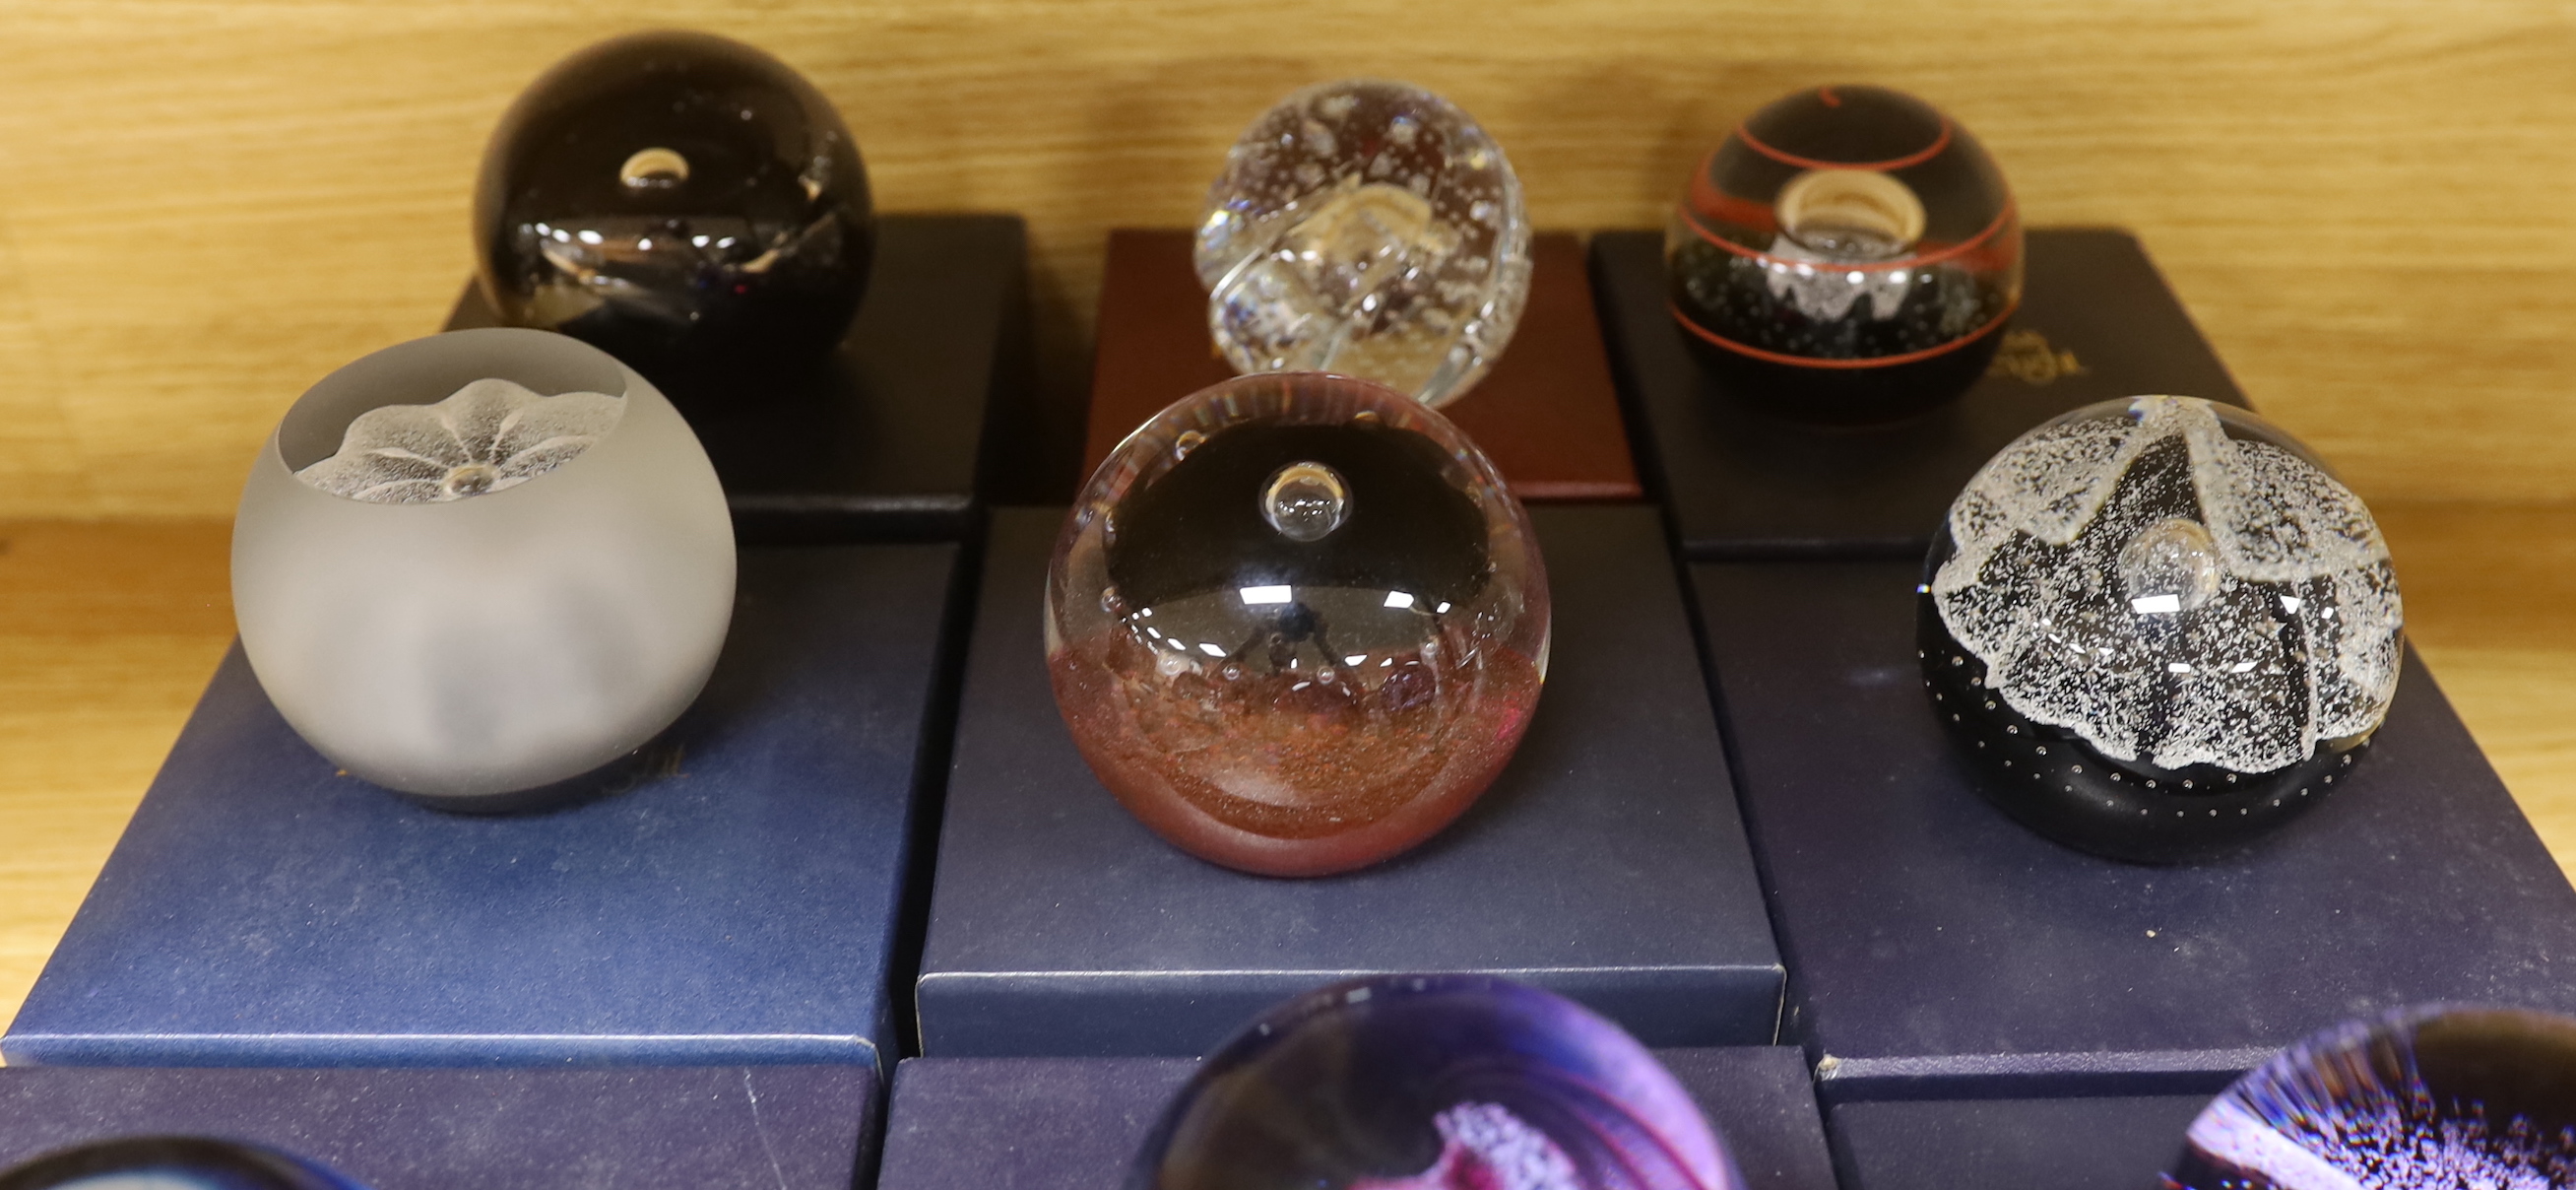 Nine Caithness paperweights including Ice Blossom, limited edition 419/1000 and Touchdown, 361/1000, each with boxes, the largest 7.5cm high